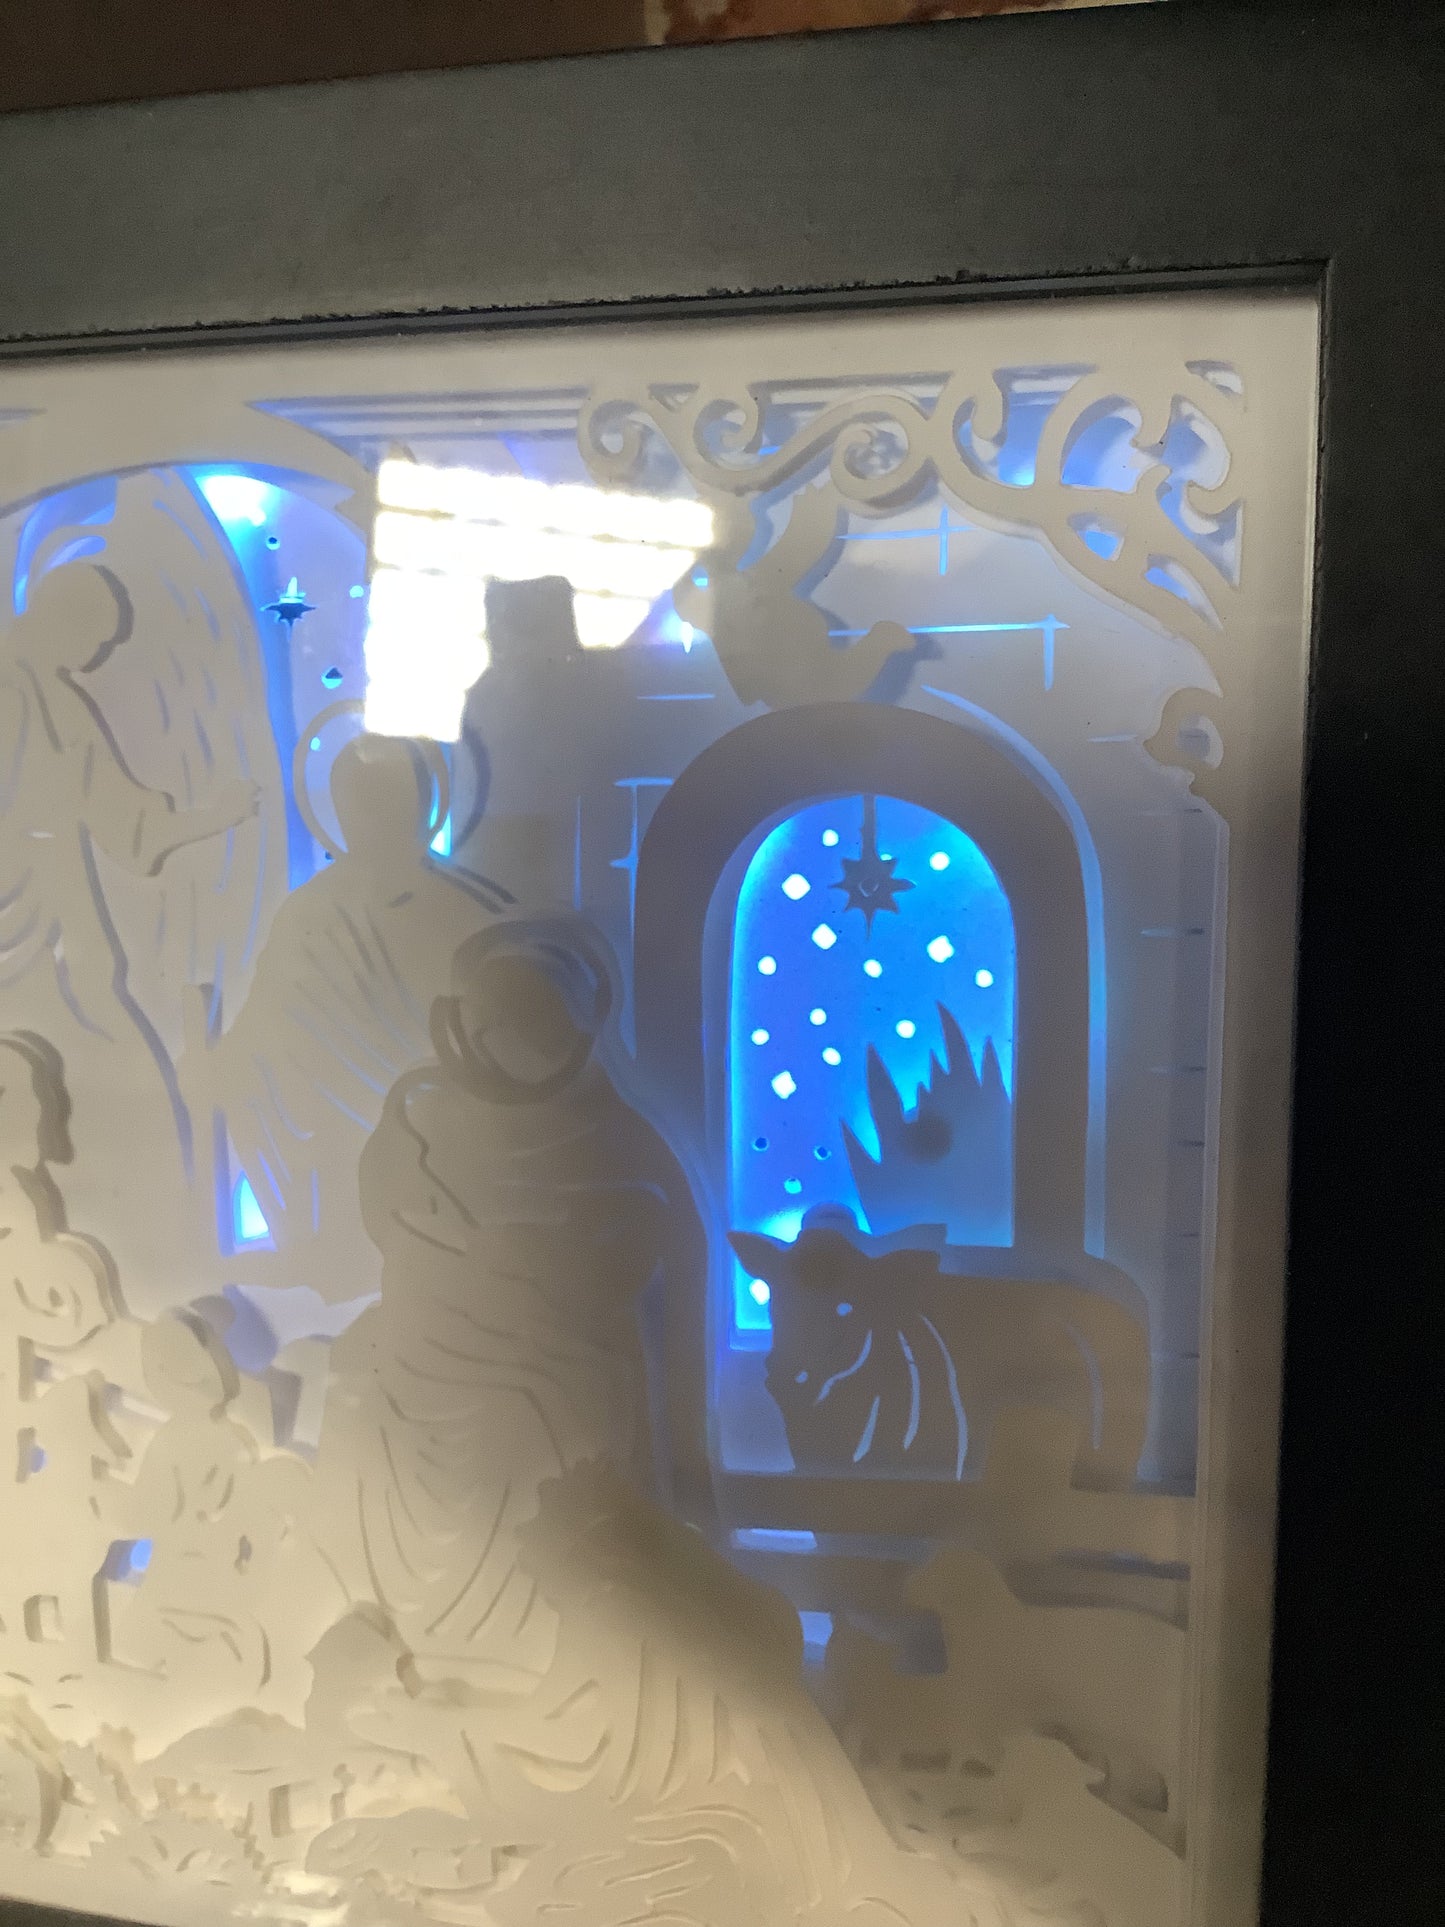 8 x 10” black shadowbox with paper cut nativity scene and lights